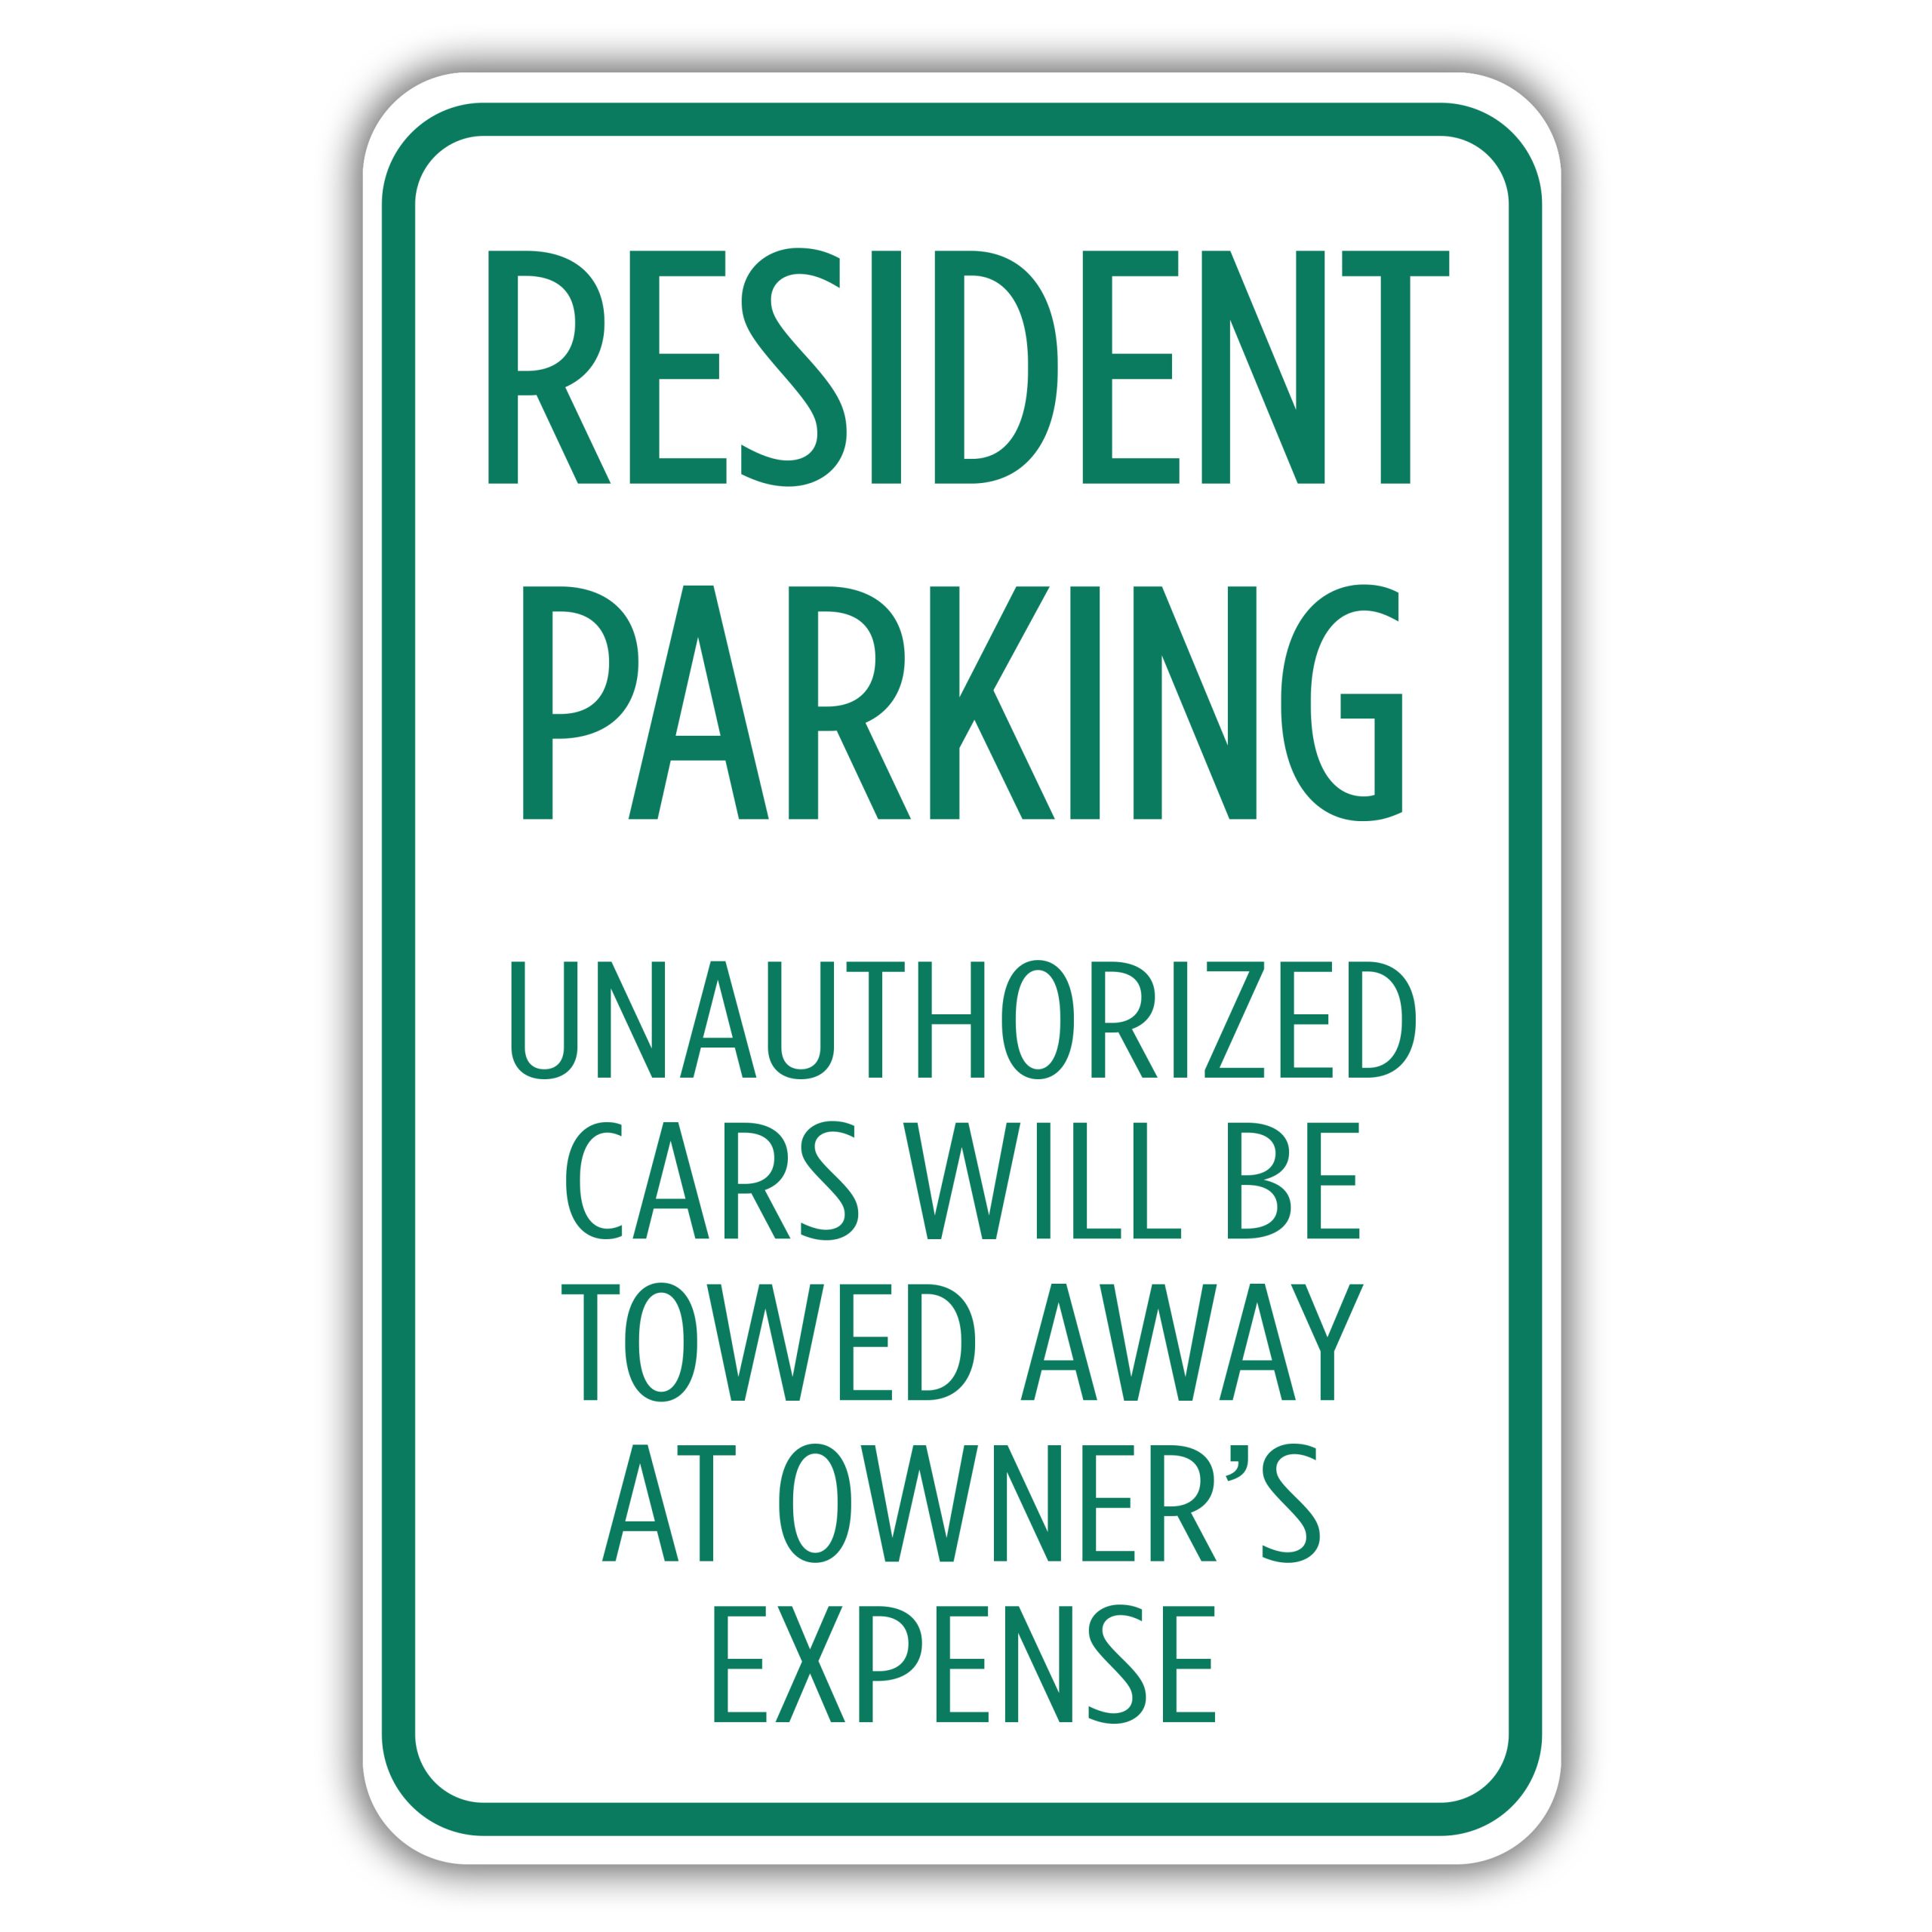 RESIDENT PARKING UNAUTHORIZED CARS WILL BE TOWED - American Sign Company